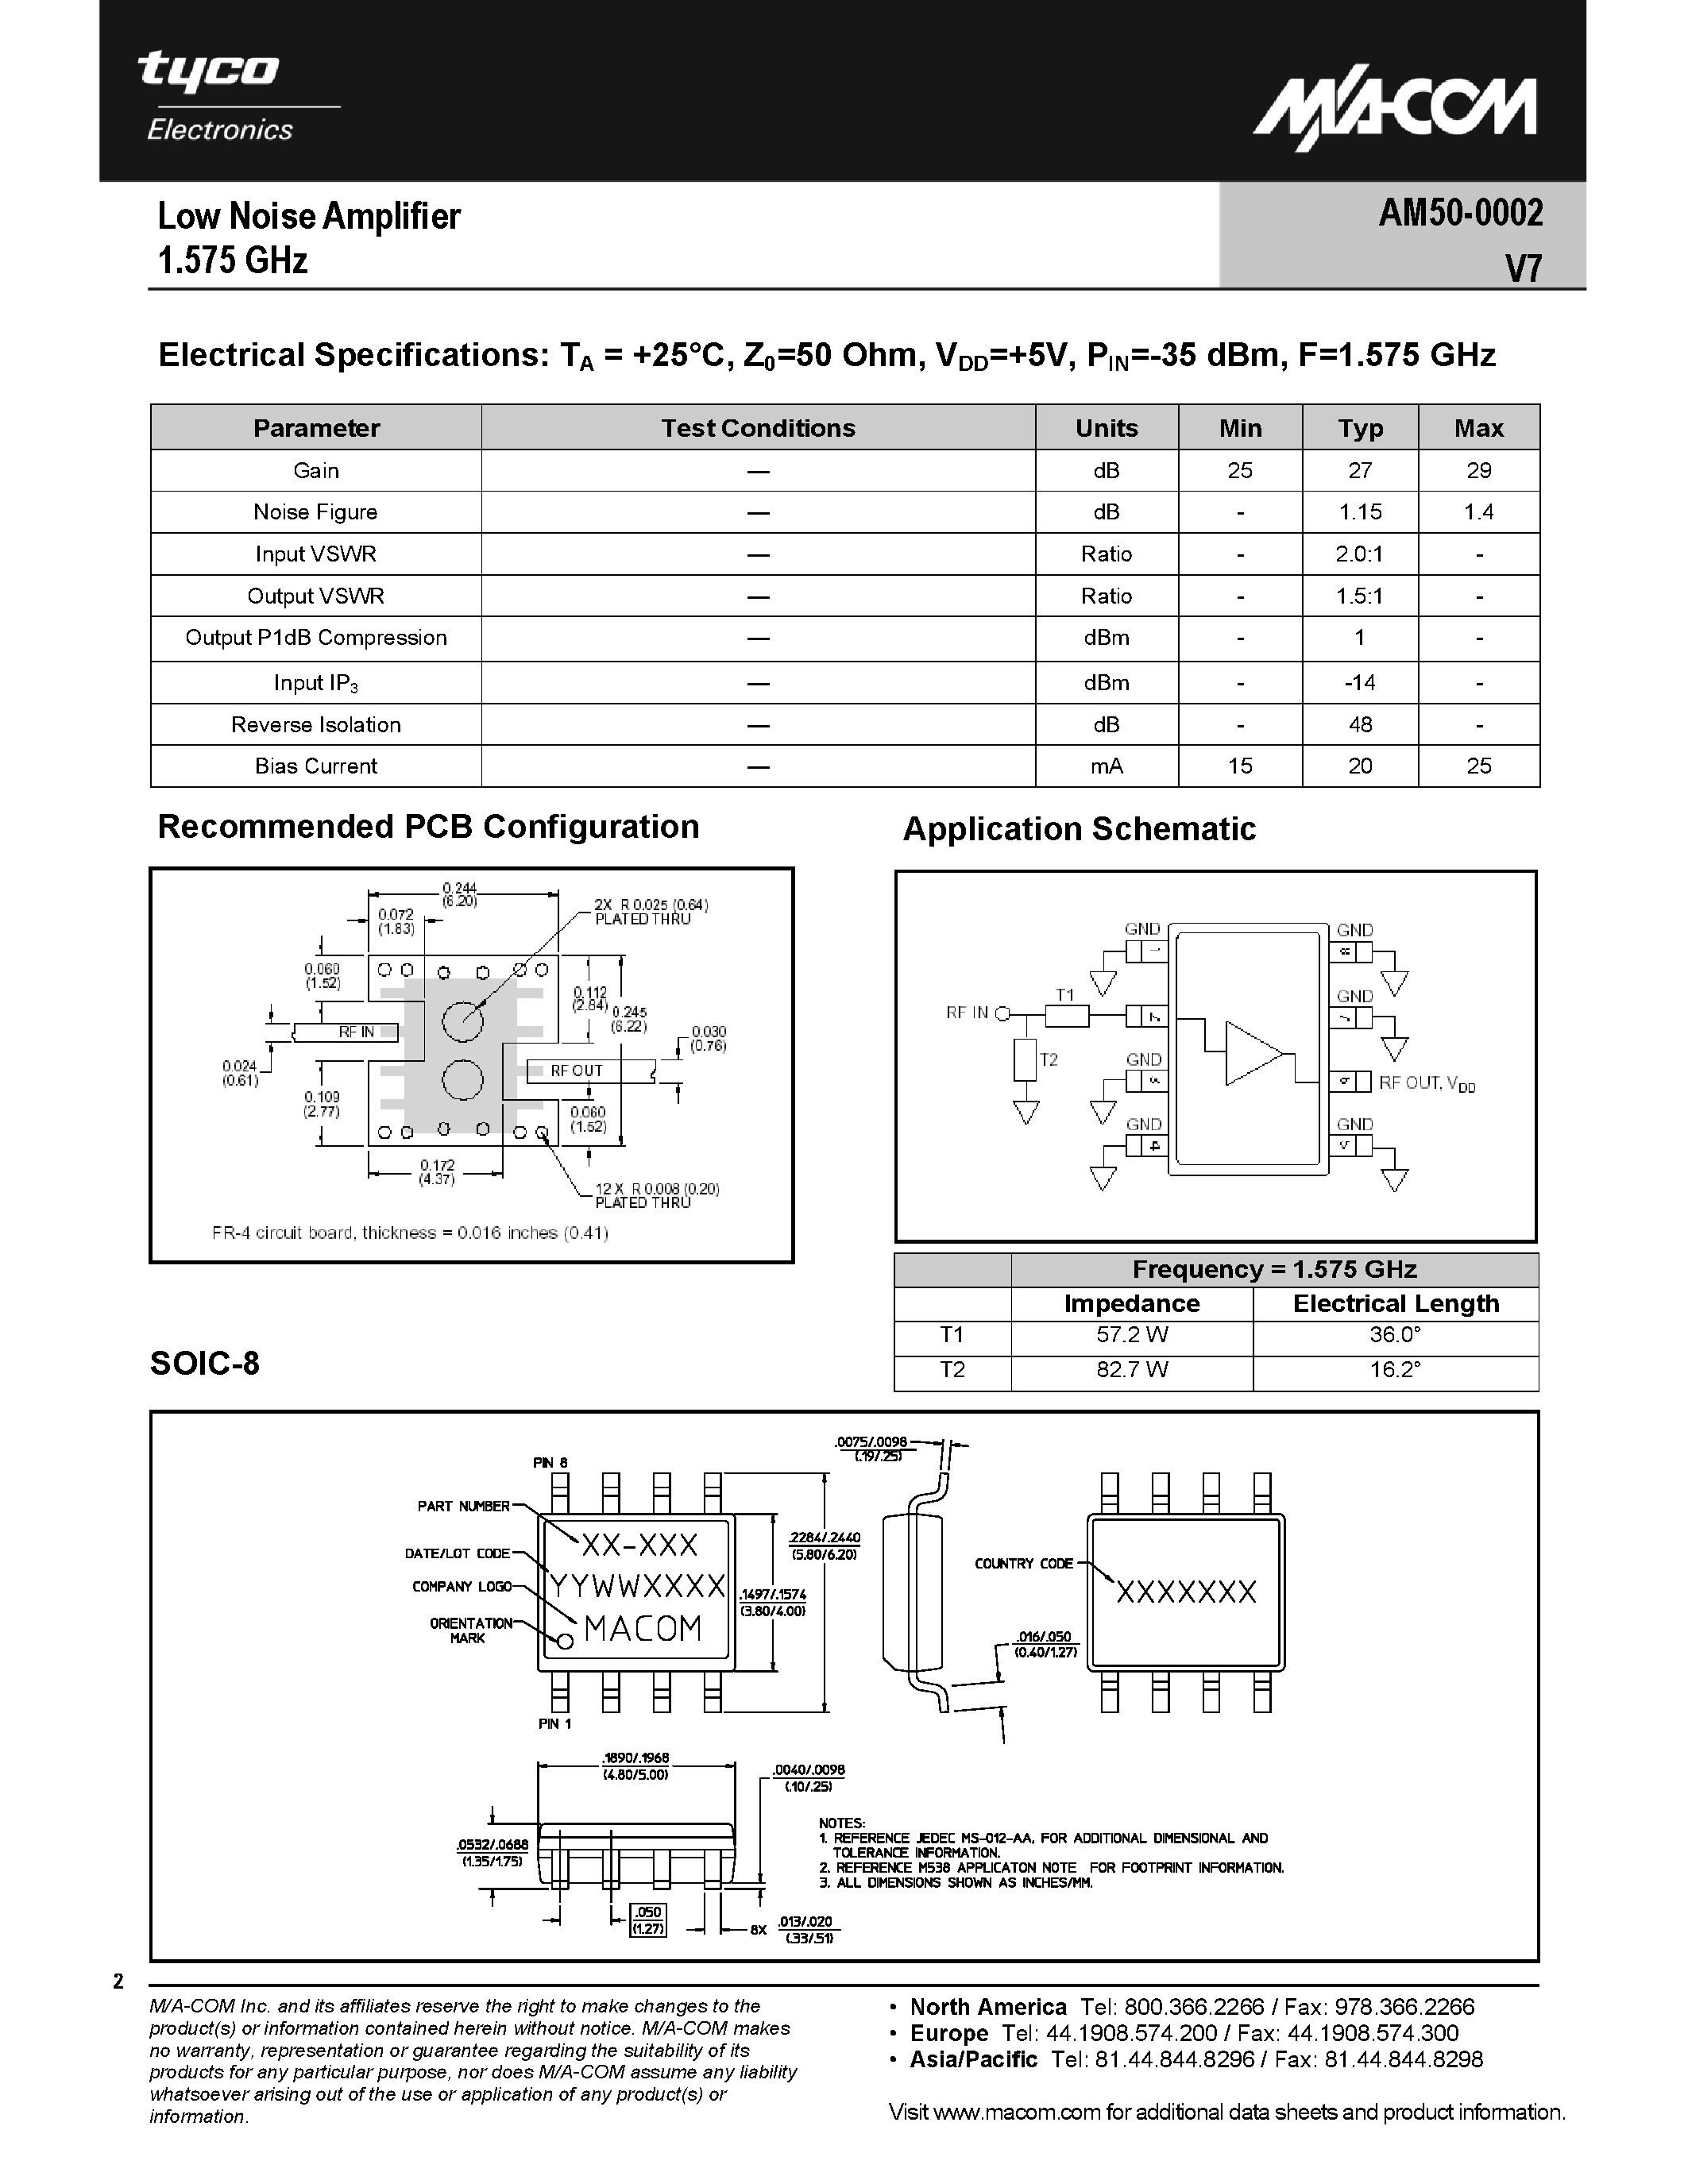 Datasheet AM50-0002V7 - Low Noise Amplifier page 2